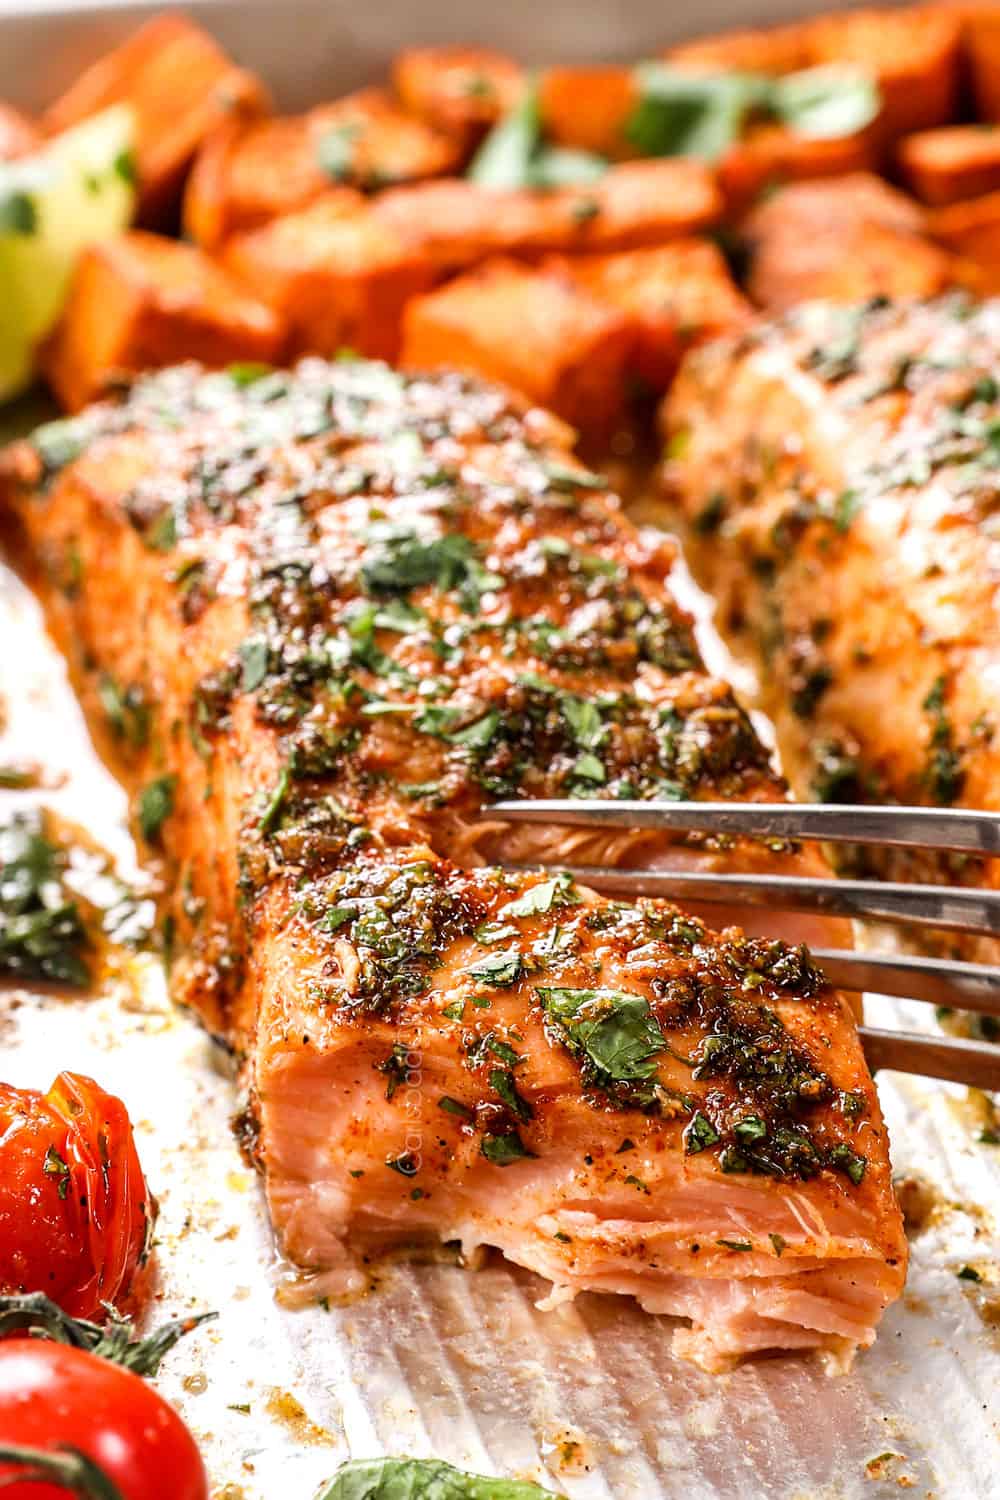 up close showing how tender baked marinated salmon is by flaking with a fork